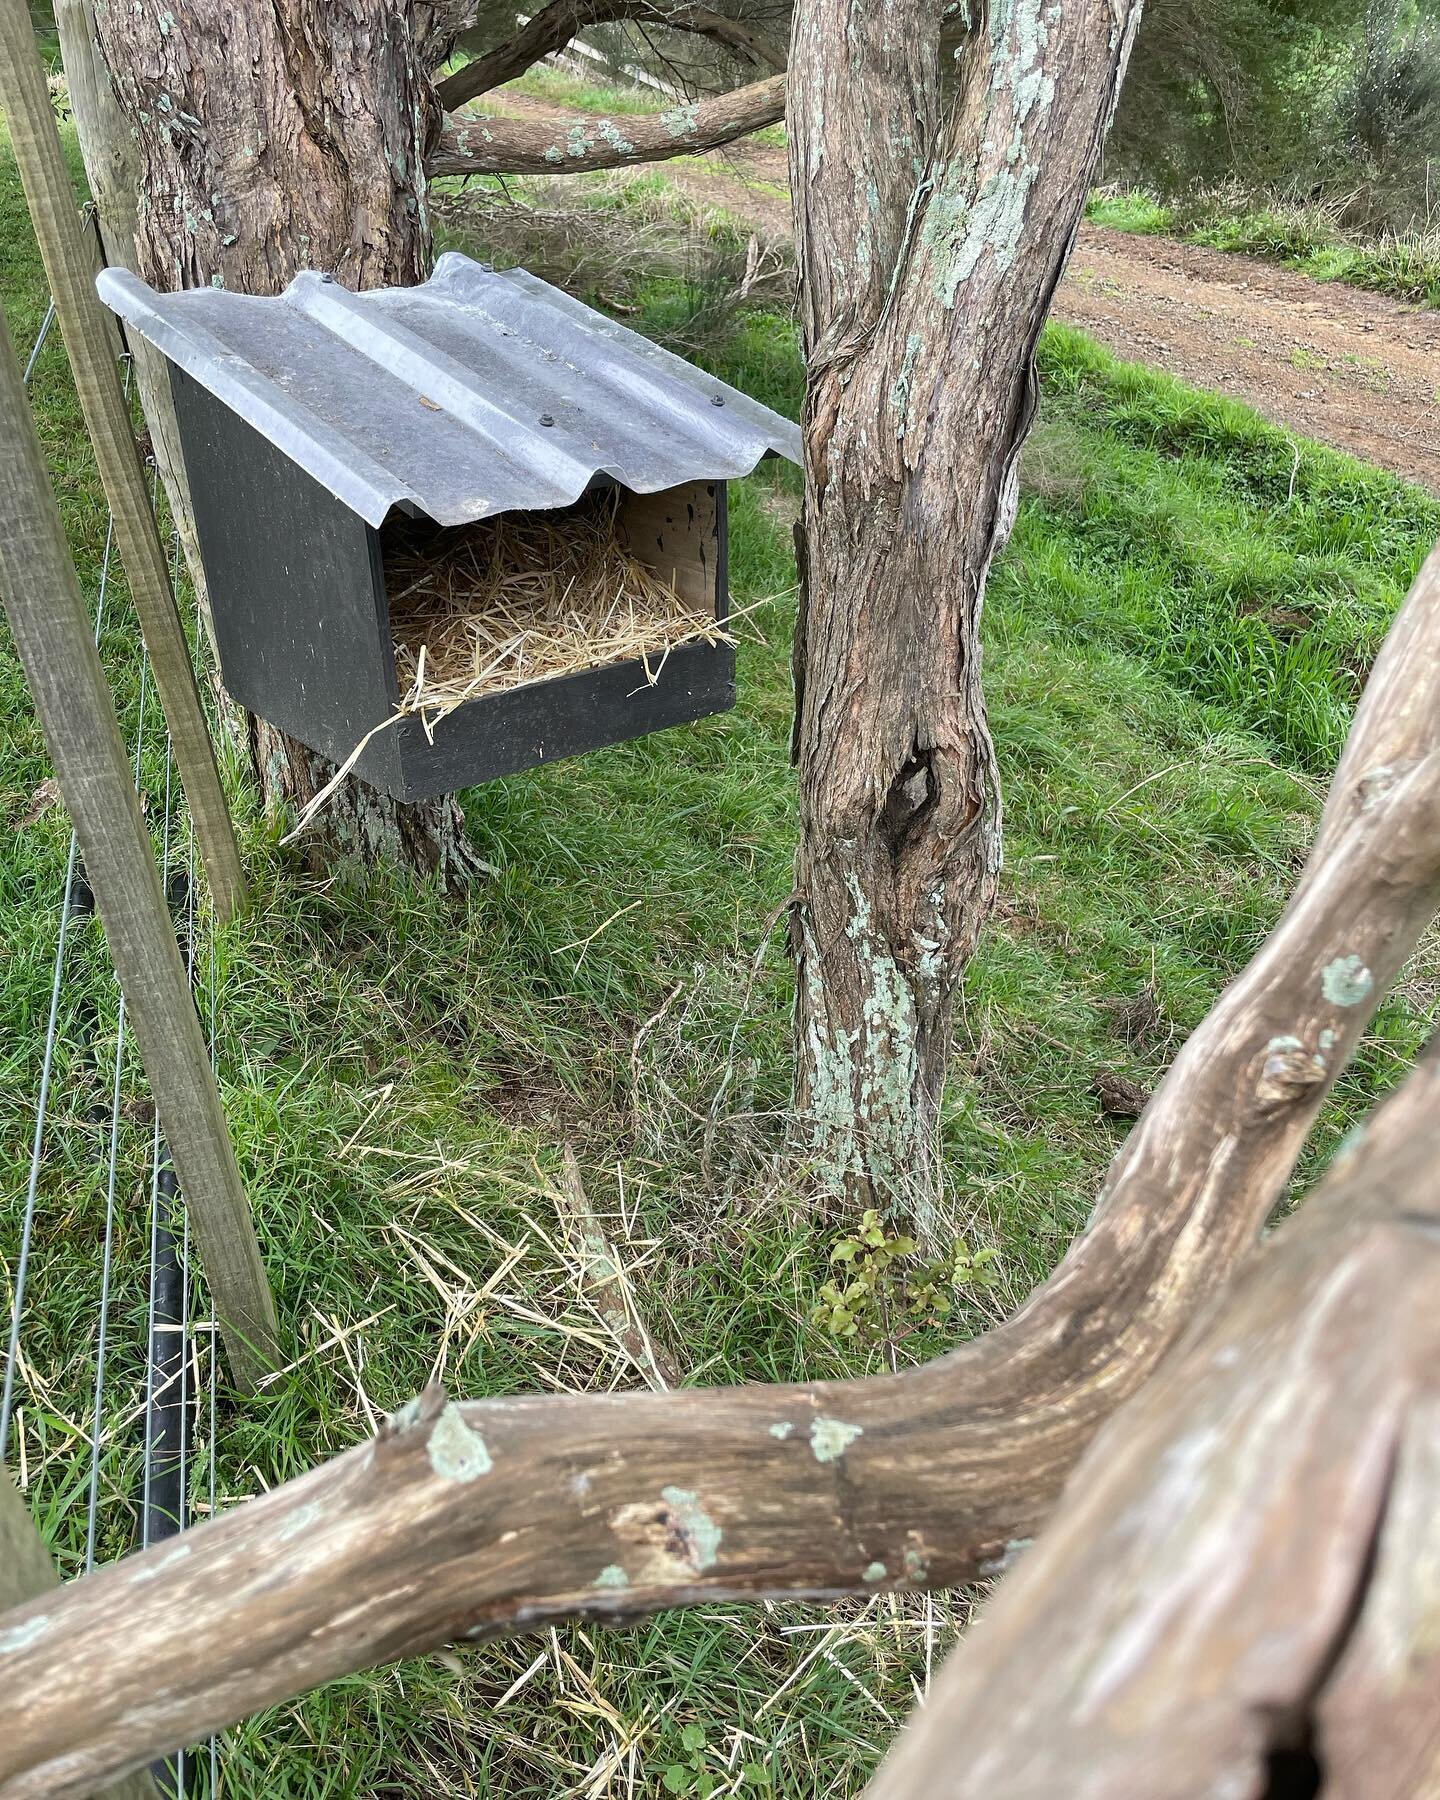 Nesting boxes are all in place for the Guinea fowl. Hopefully they will get filled up with eggs!